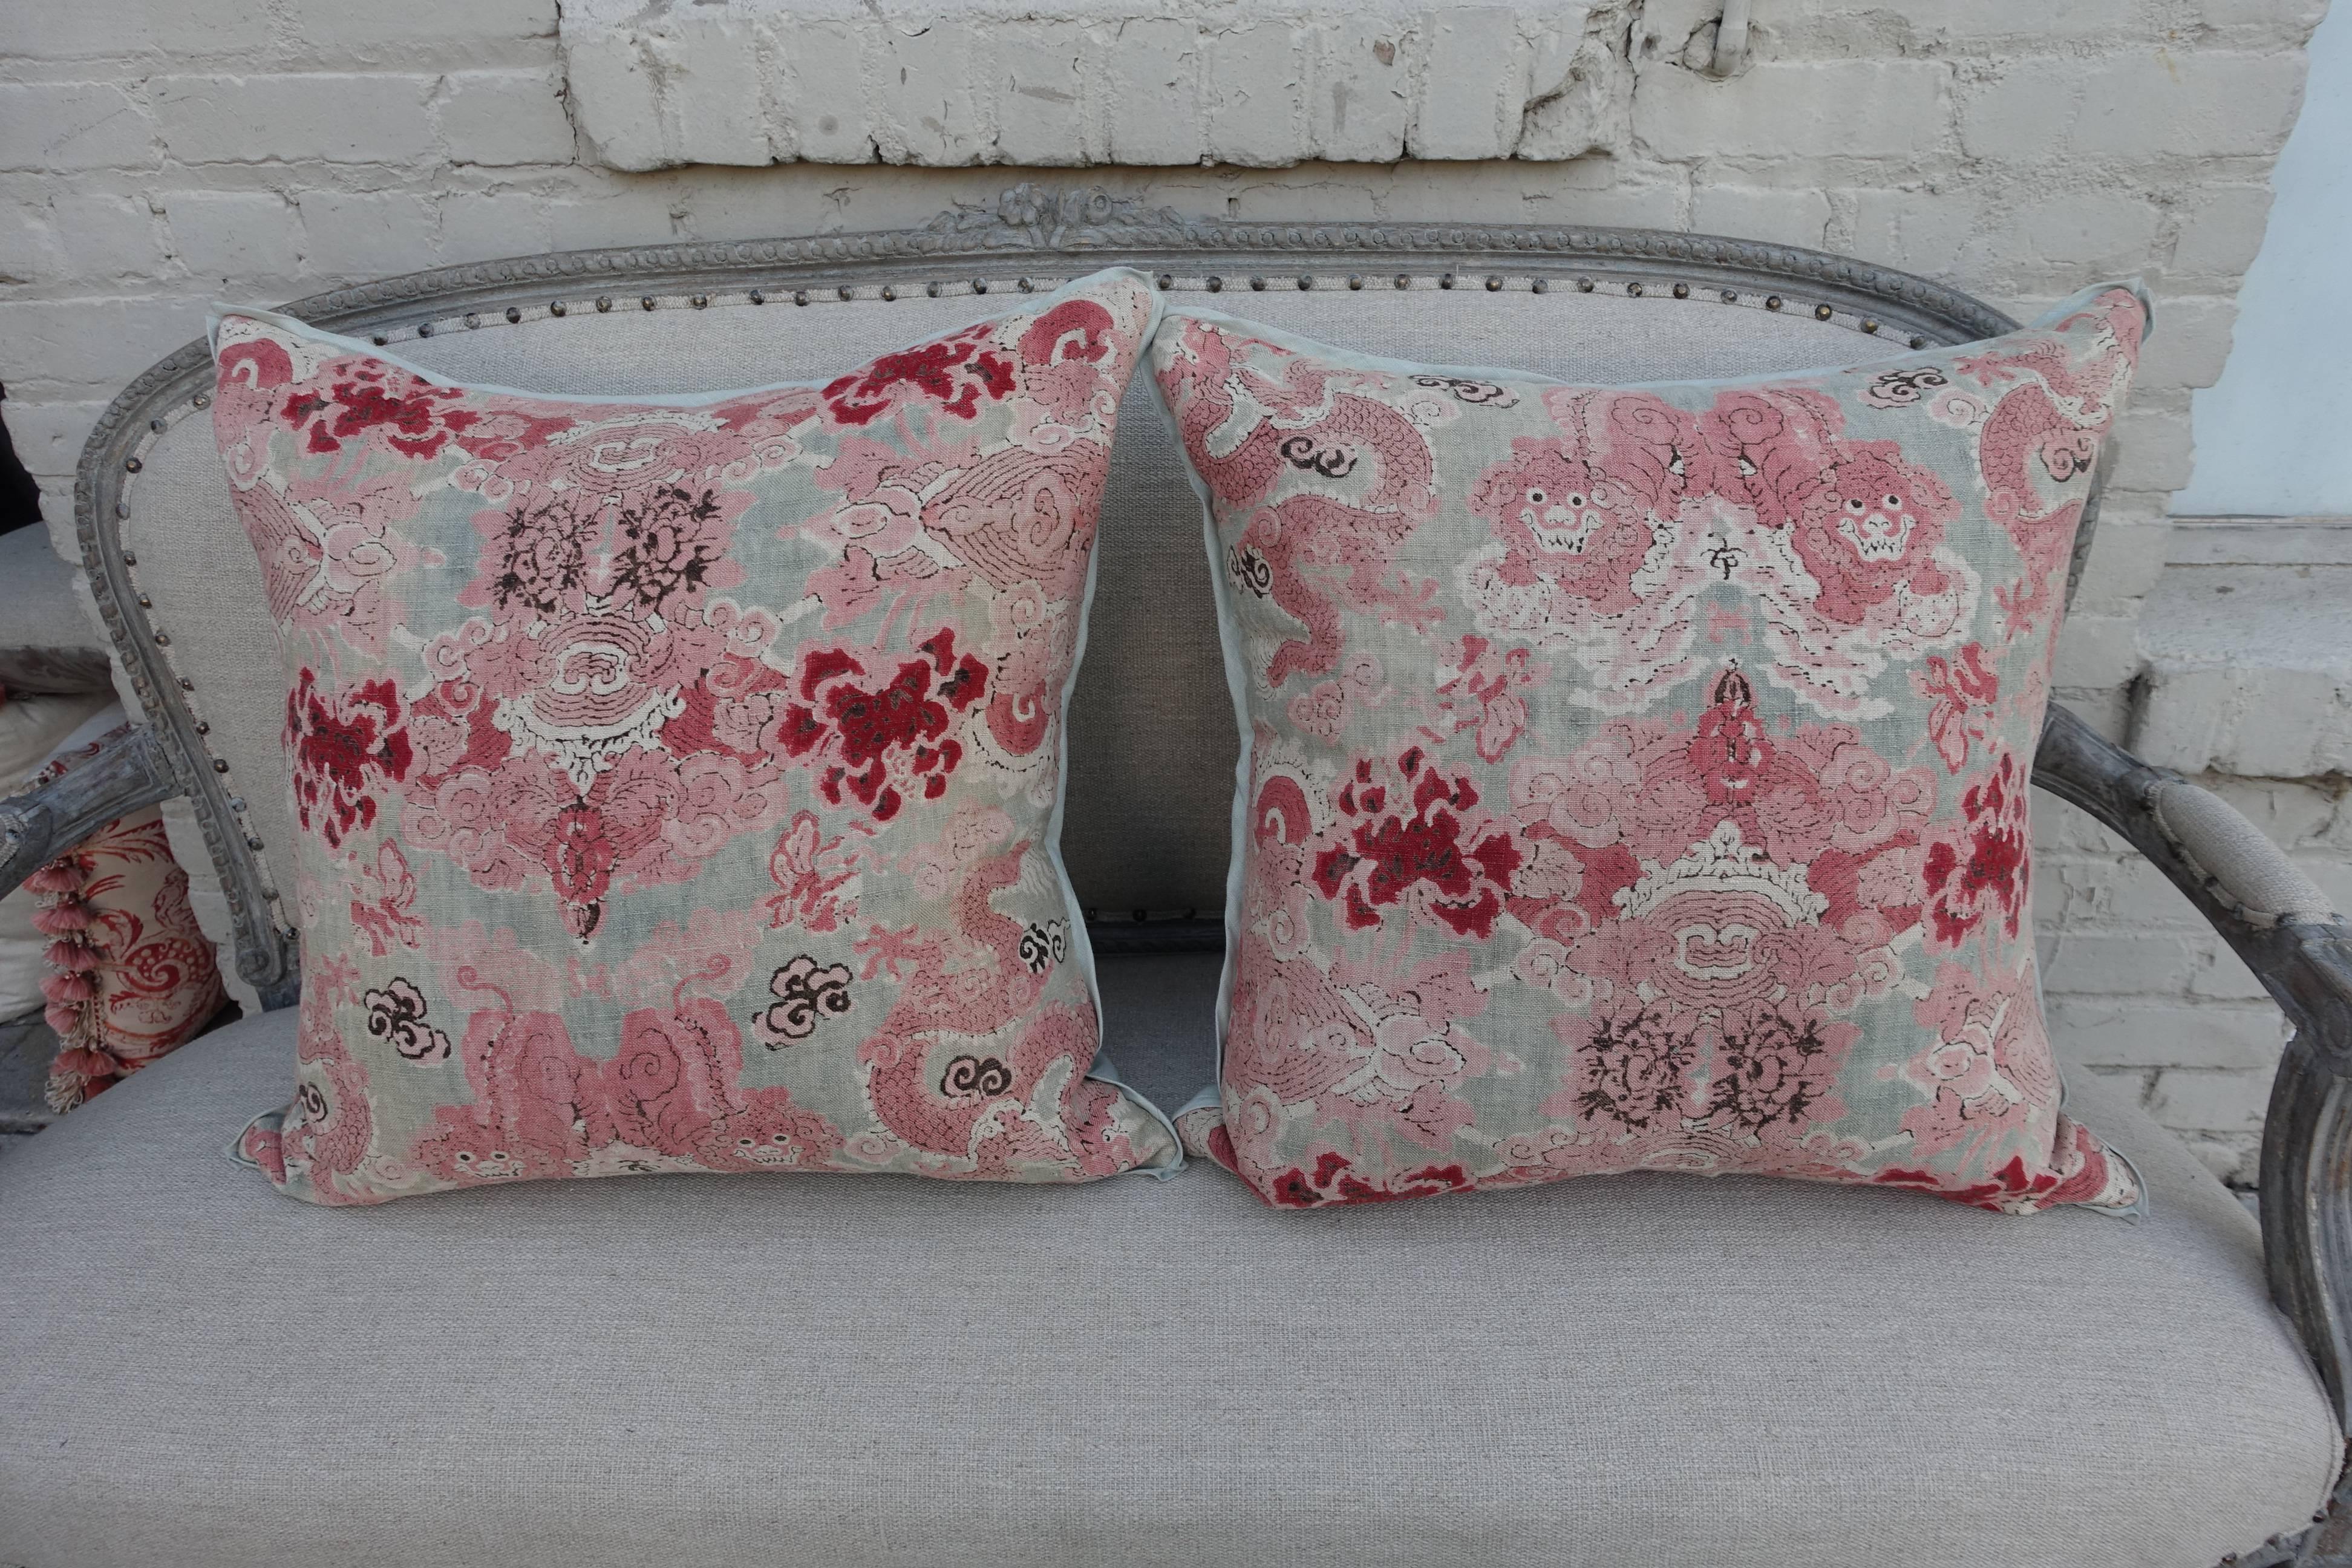 Pair of custom pillows made with vintage printed chinioserie cotton fabric. Breeze colored linen backs with self welt detail. Down inserts.